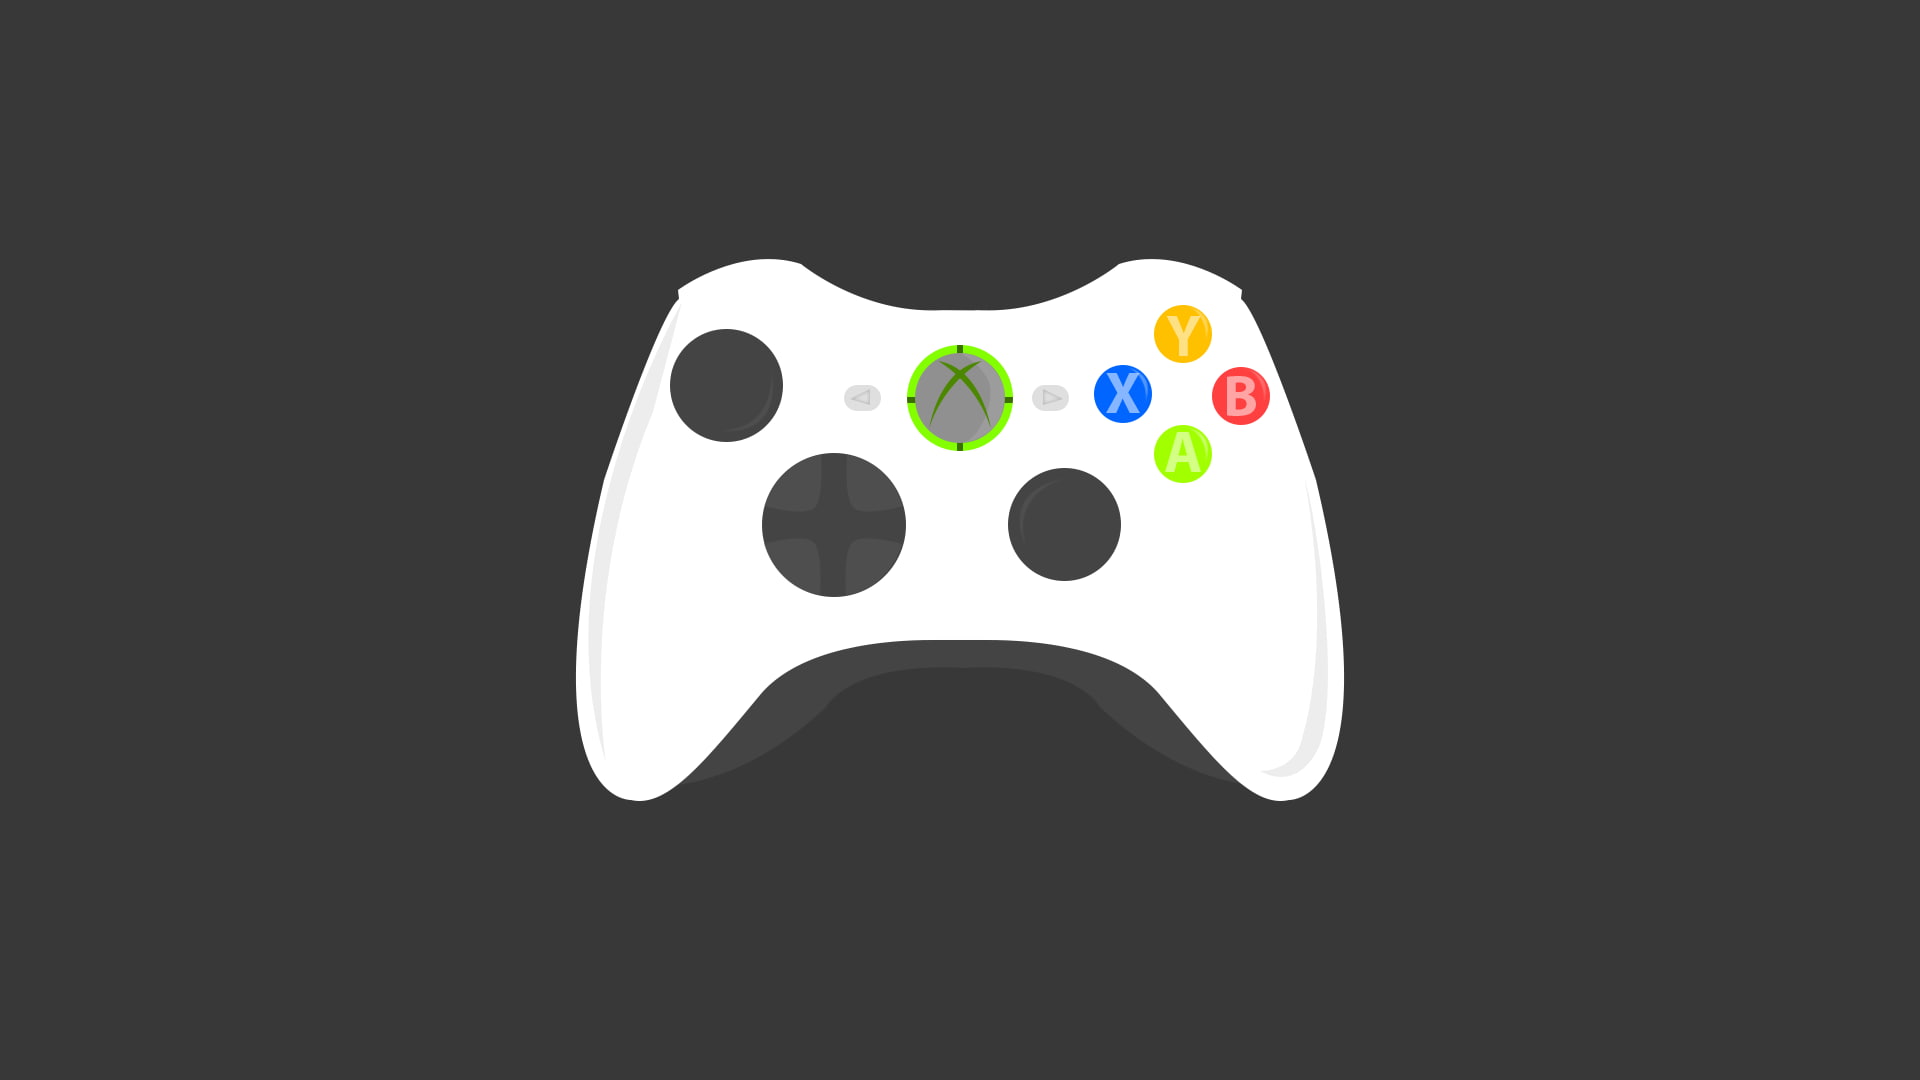 Xbox, controller, minimalism, video games, technology, grey